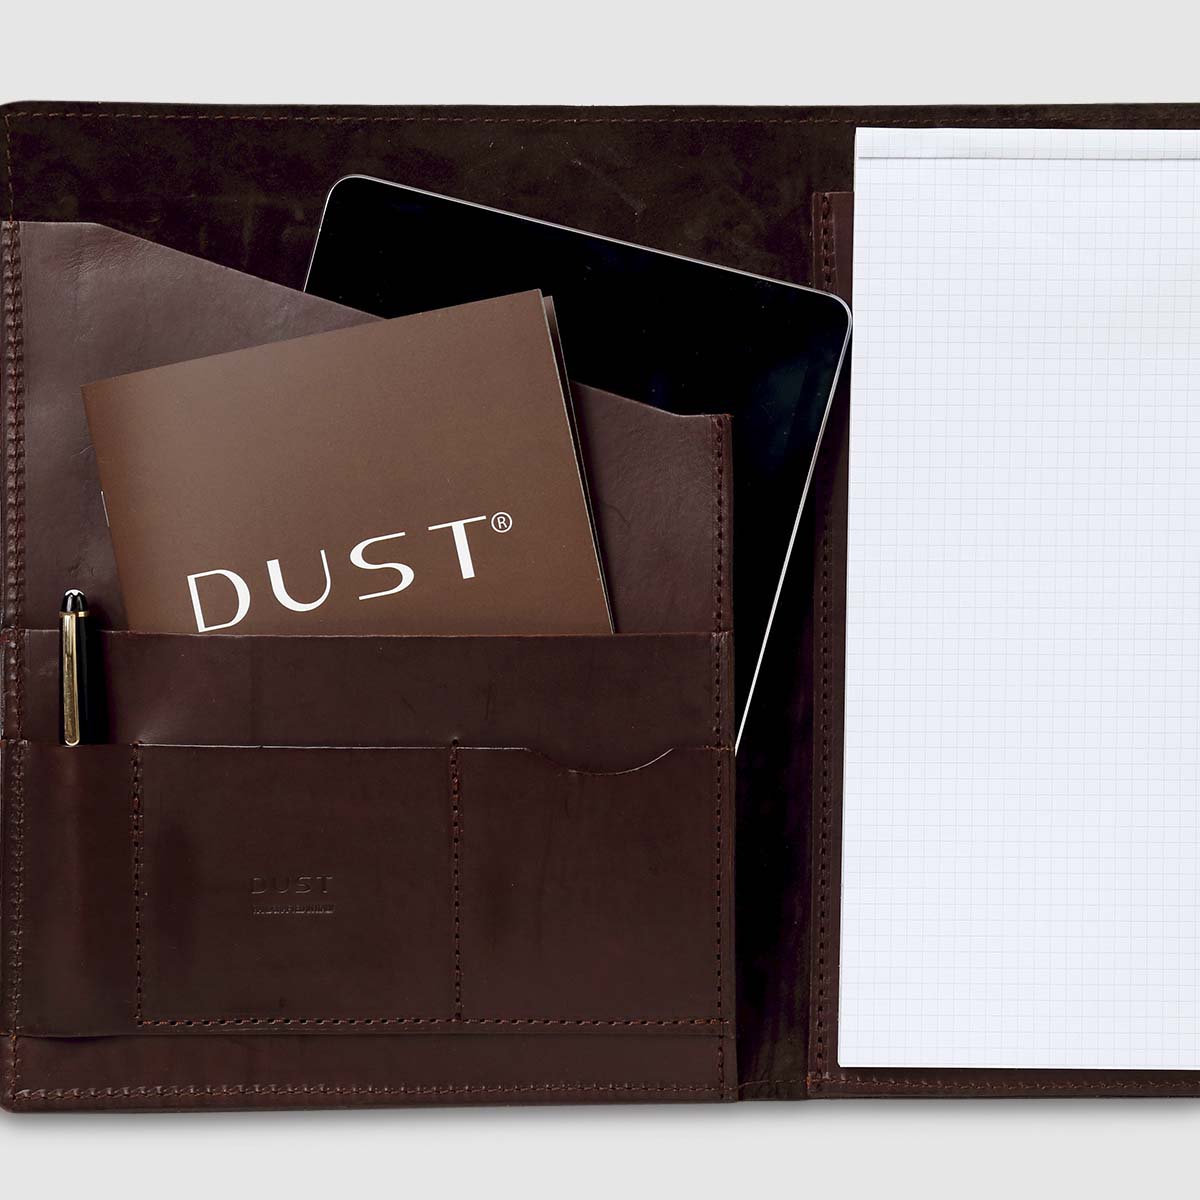 The Dust Company Pointe Leather Folio The Dust on sale 2022 2